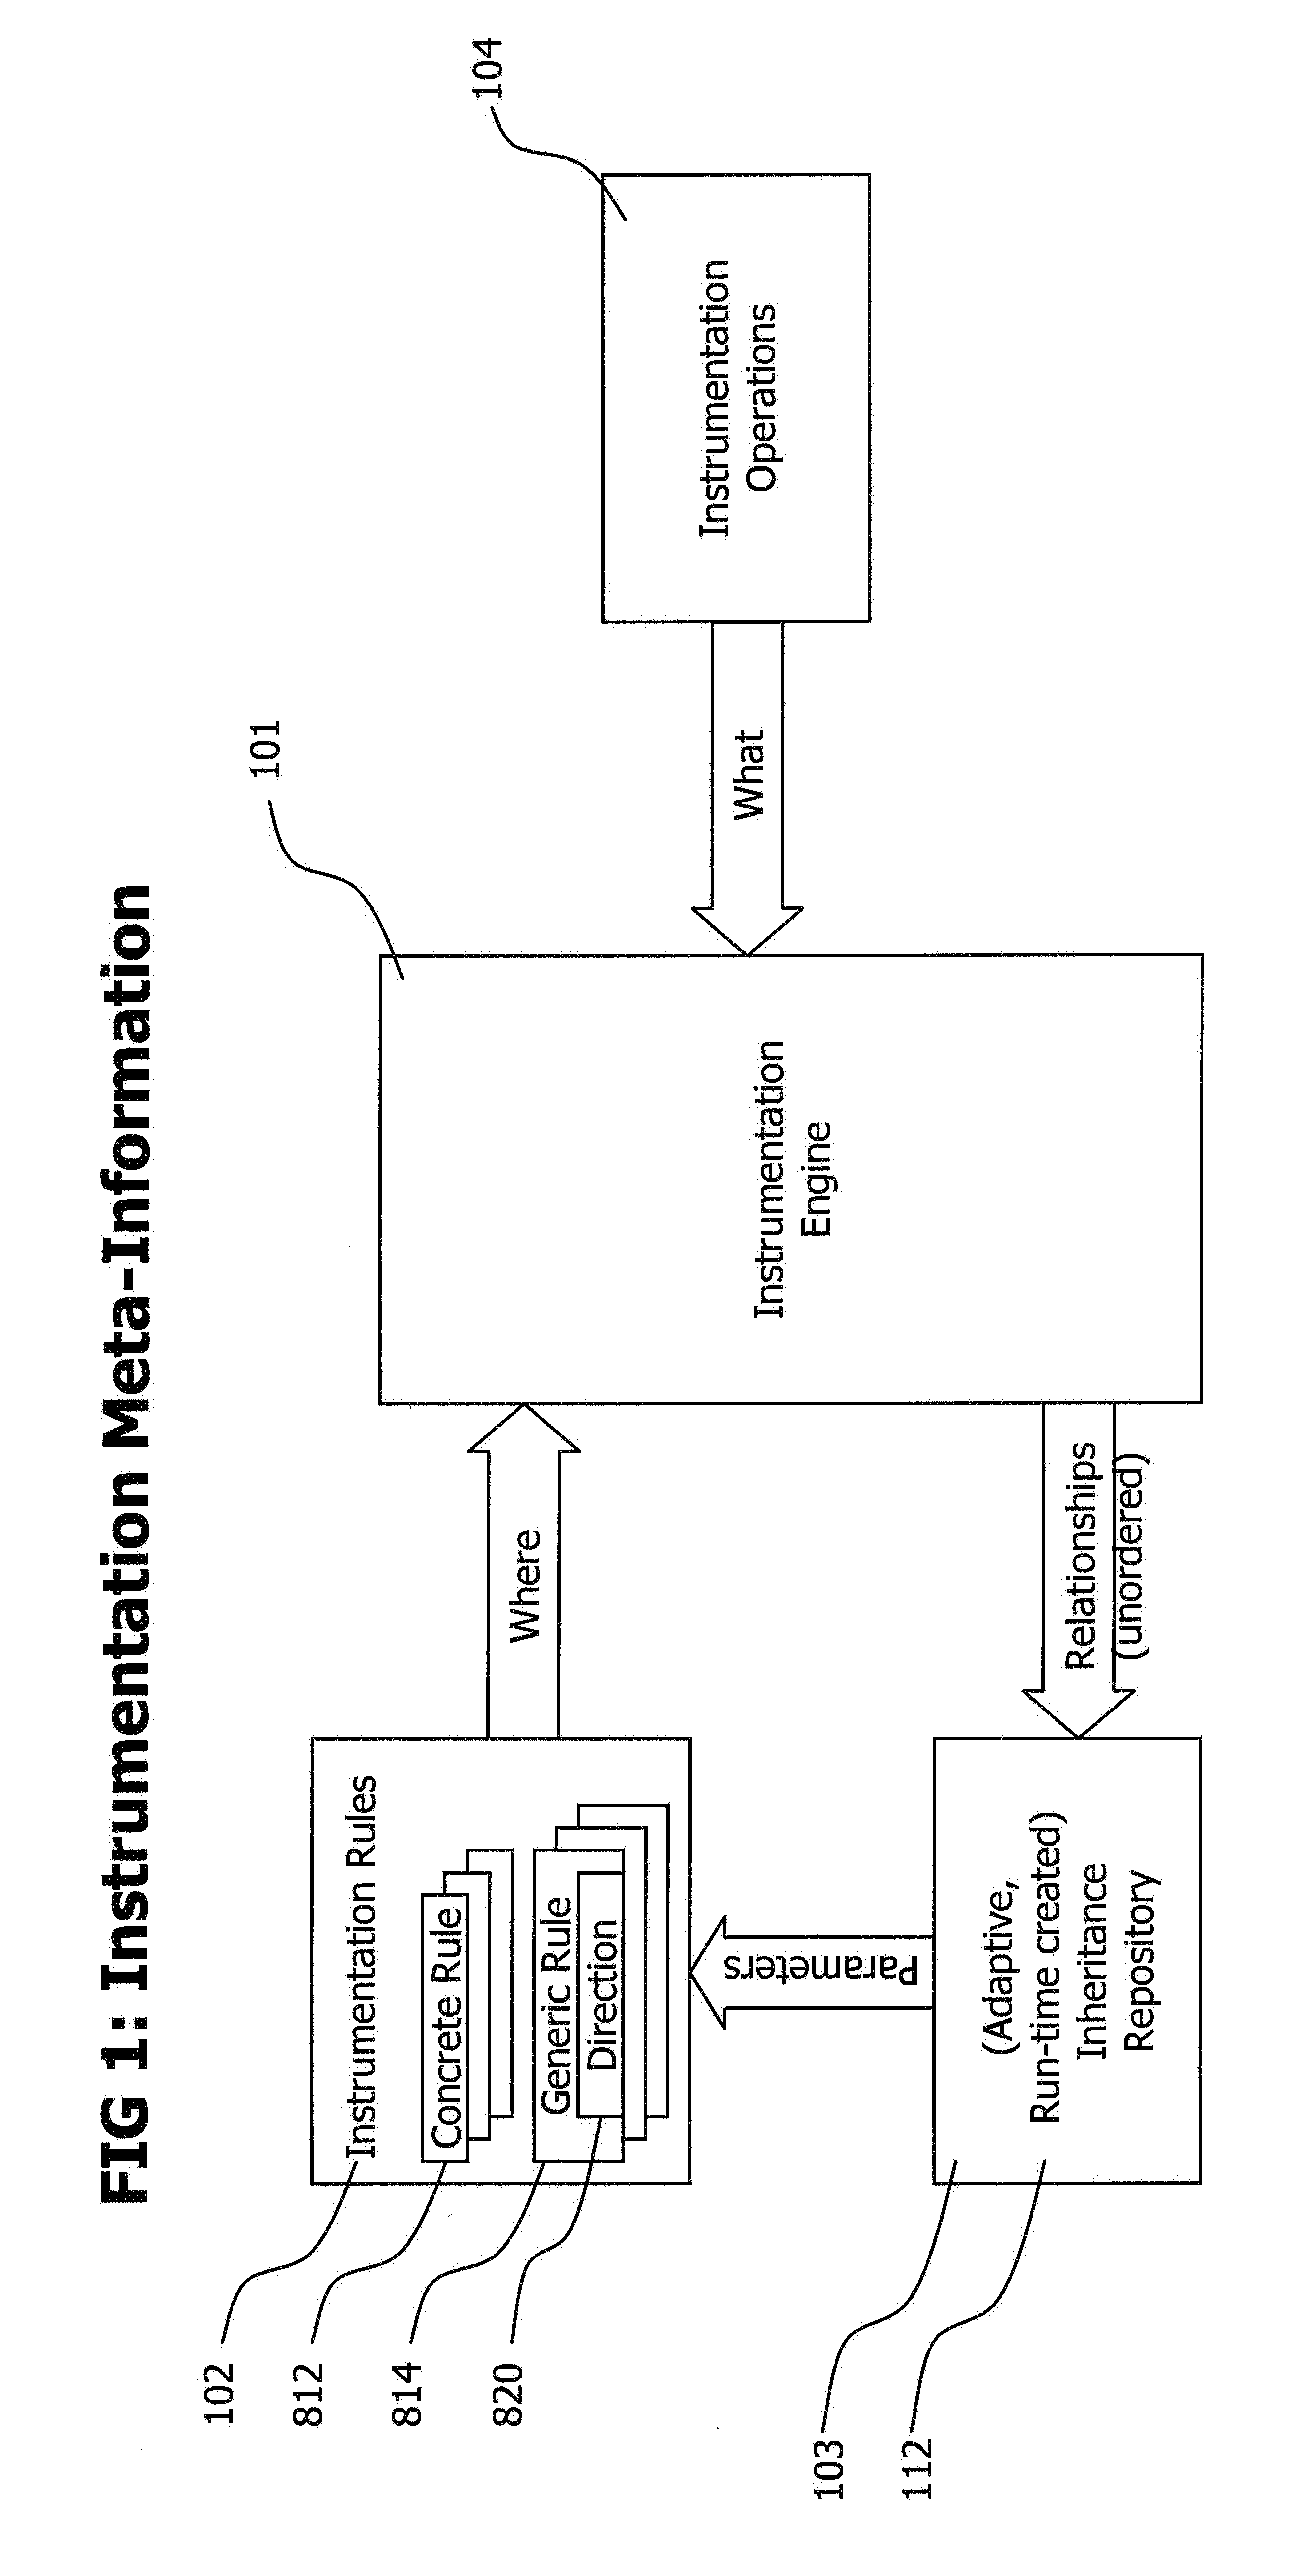 Method and System for Adaptive, Generic Code Instrumentation using Run-time or Load-time generated Inheritance Information for Diagnosis and Monitoring Application Performance and Failure